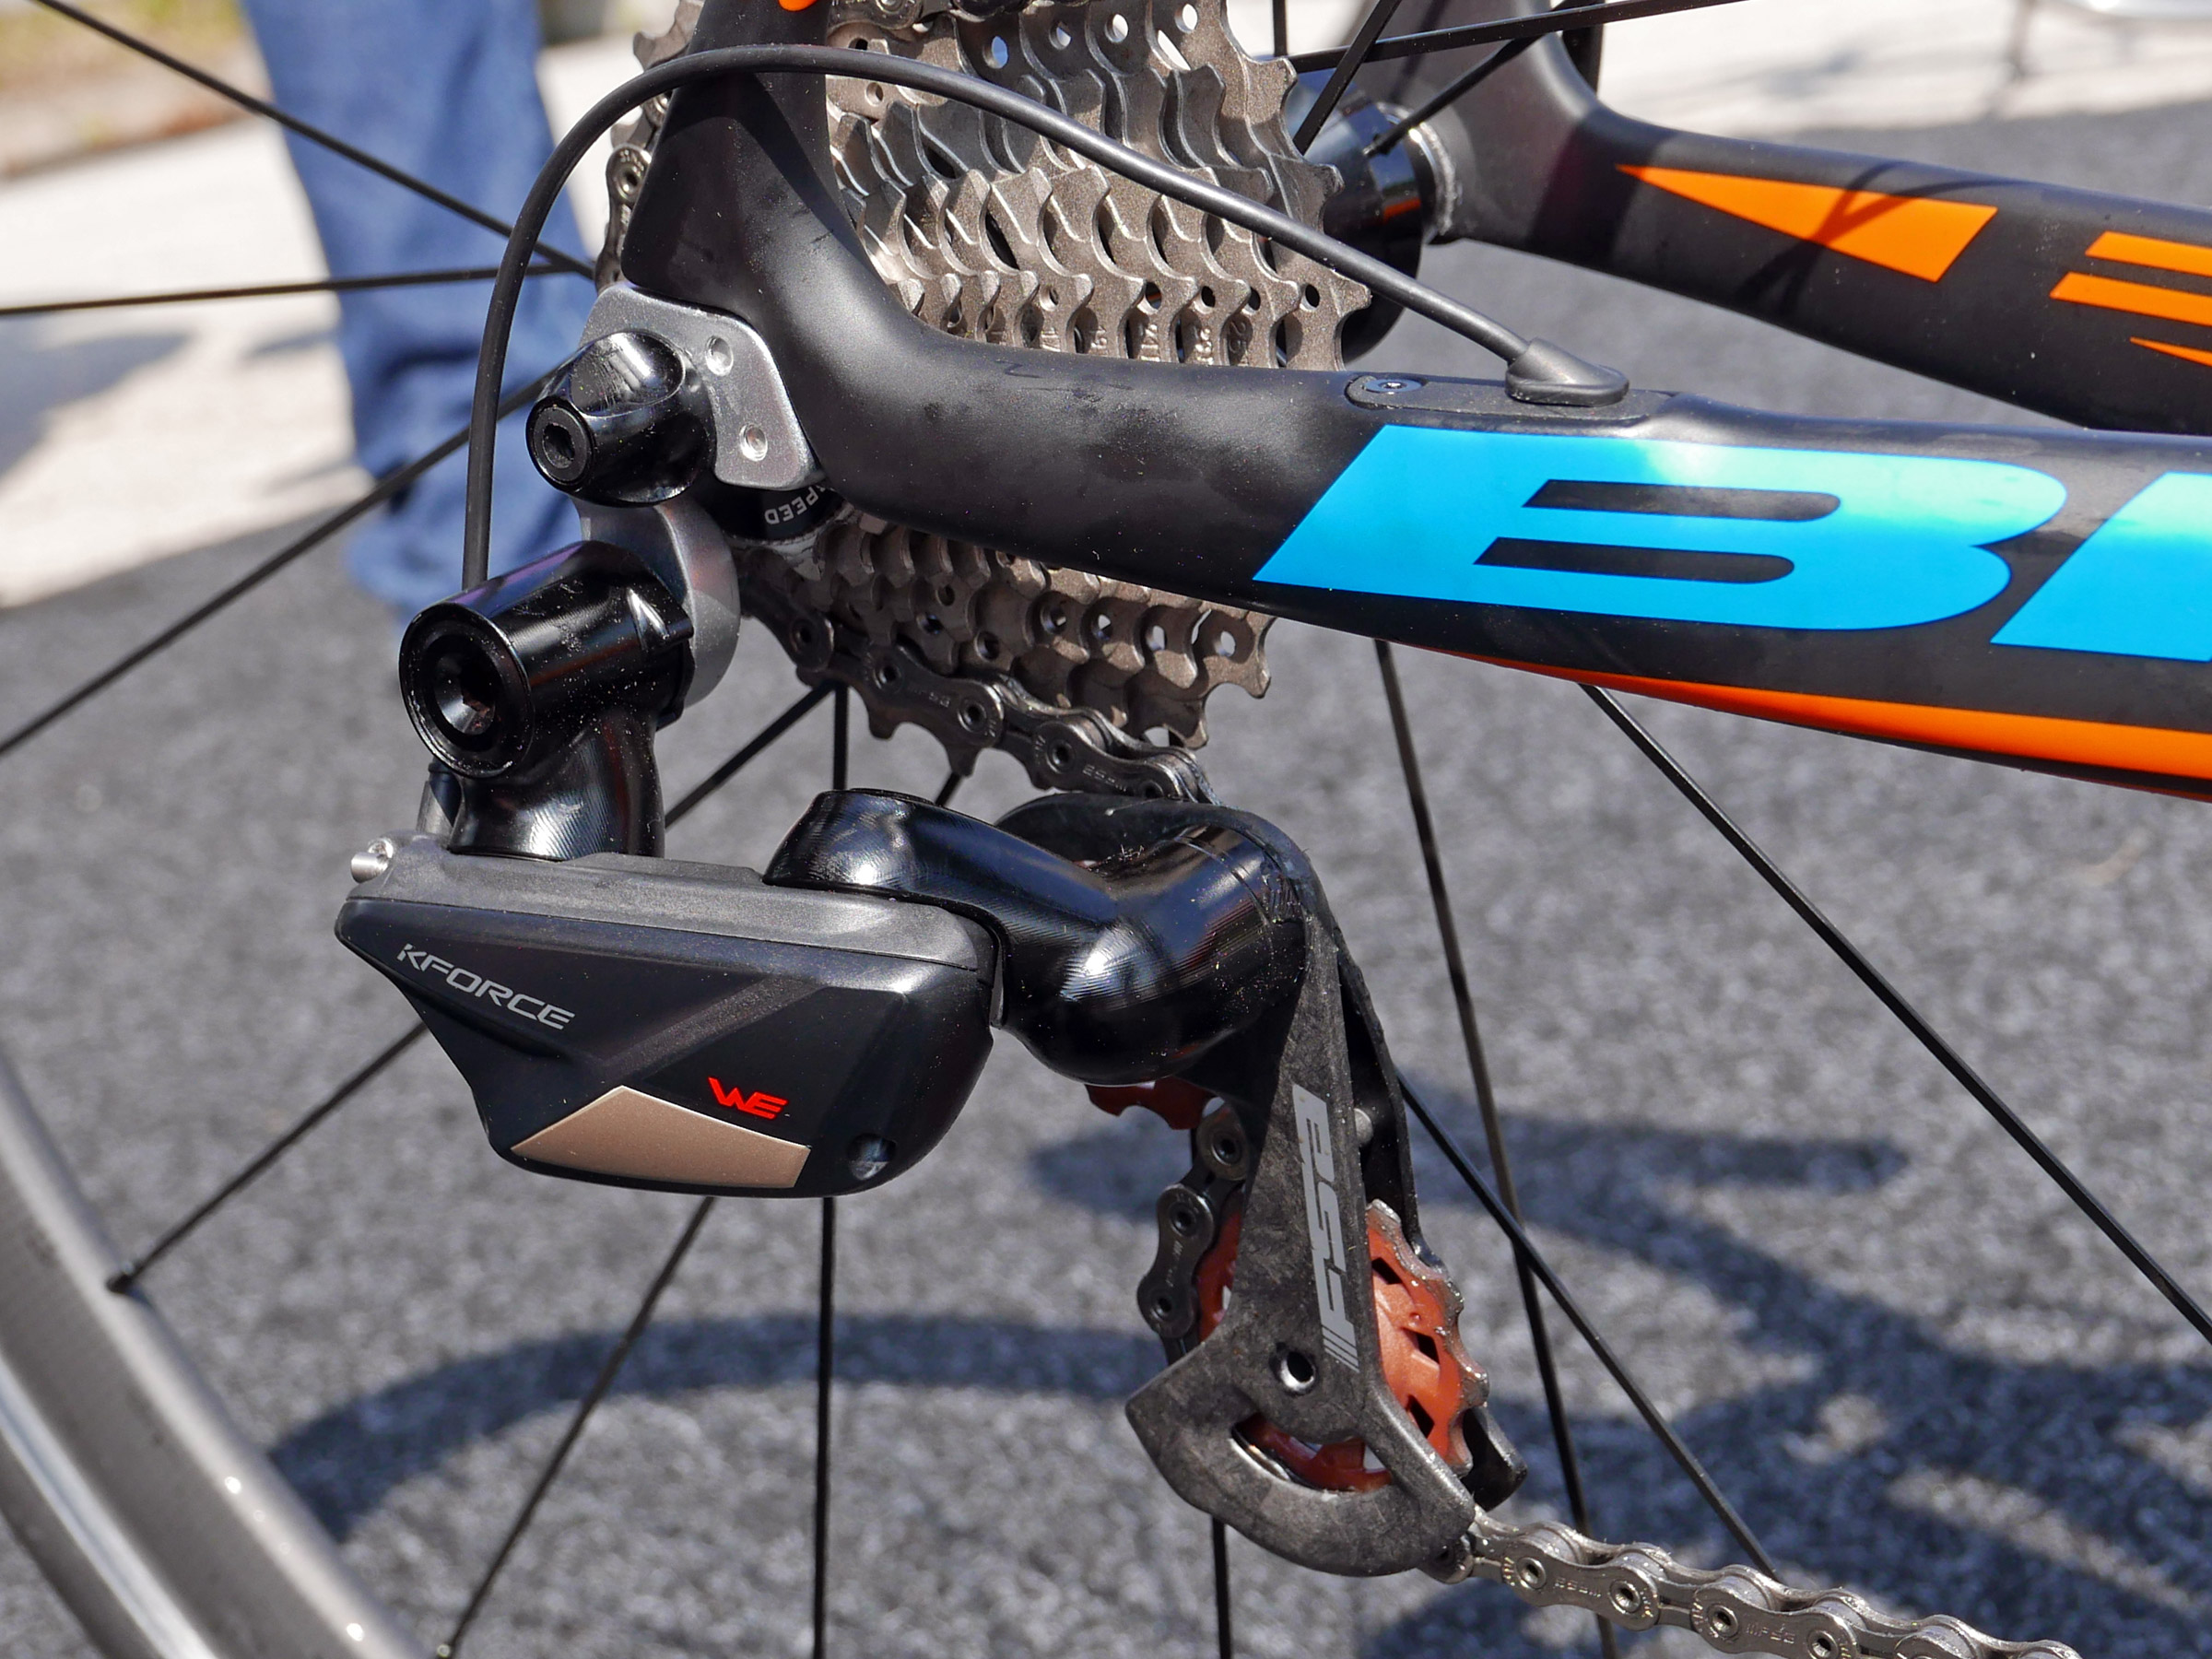 EB16: FSA officially launches K-Force WE wireless electronic road groupset - Bikerumor2400 x 1800